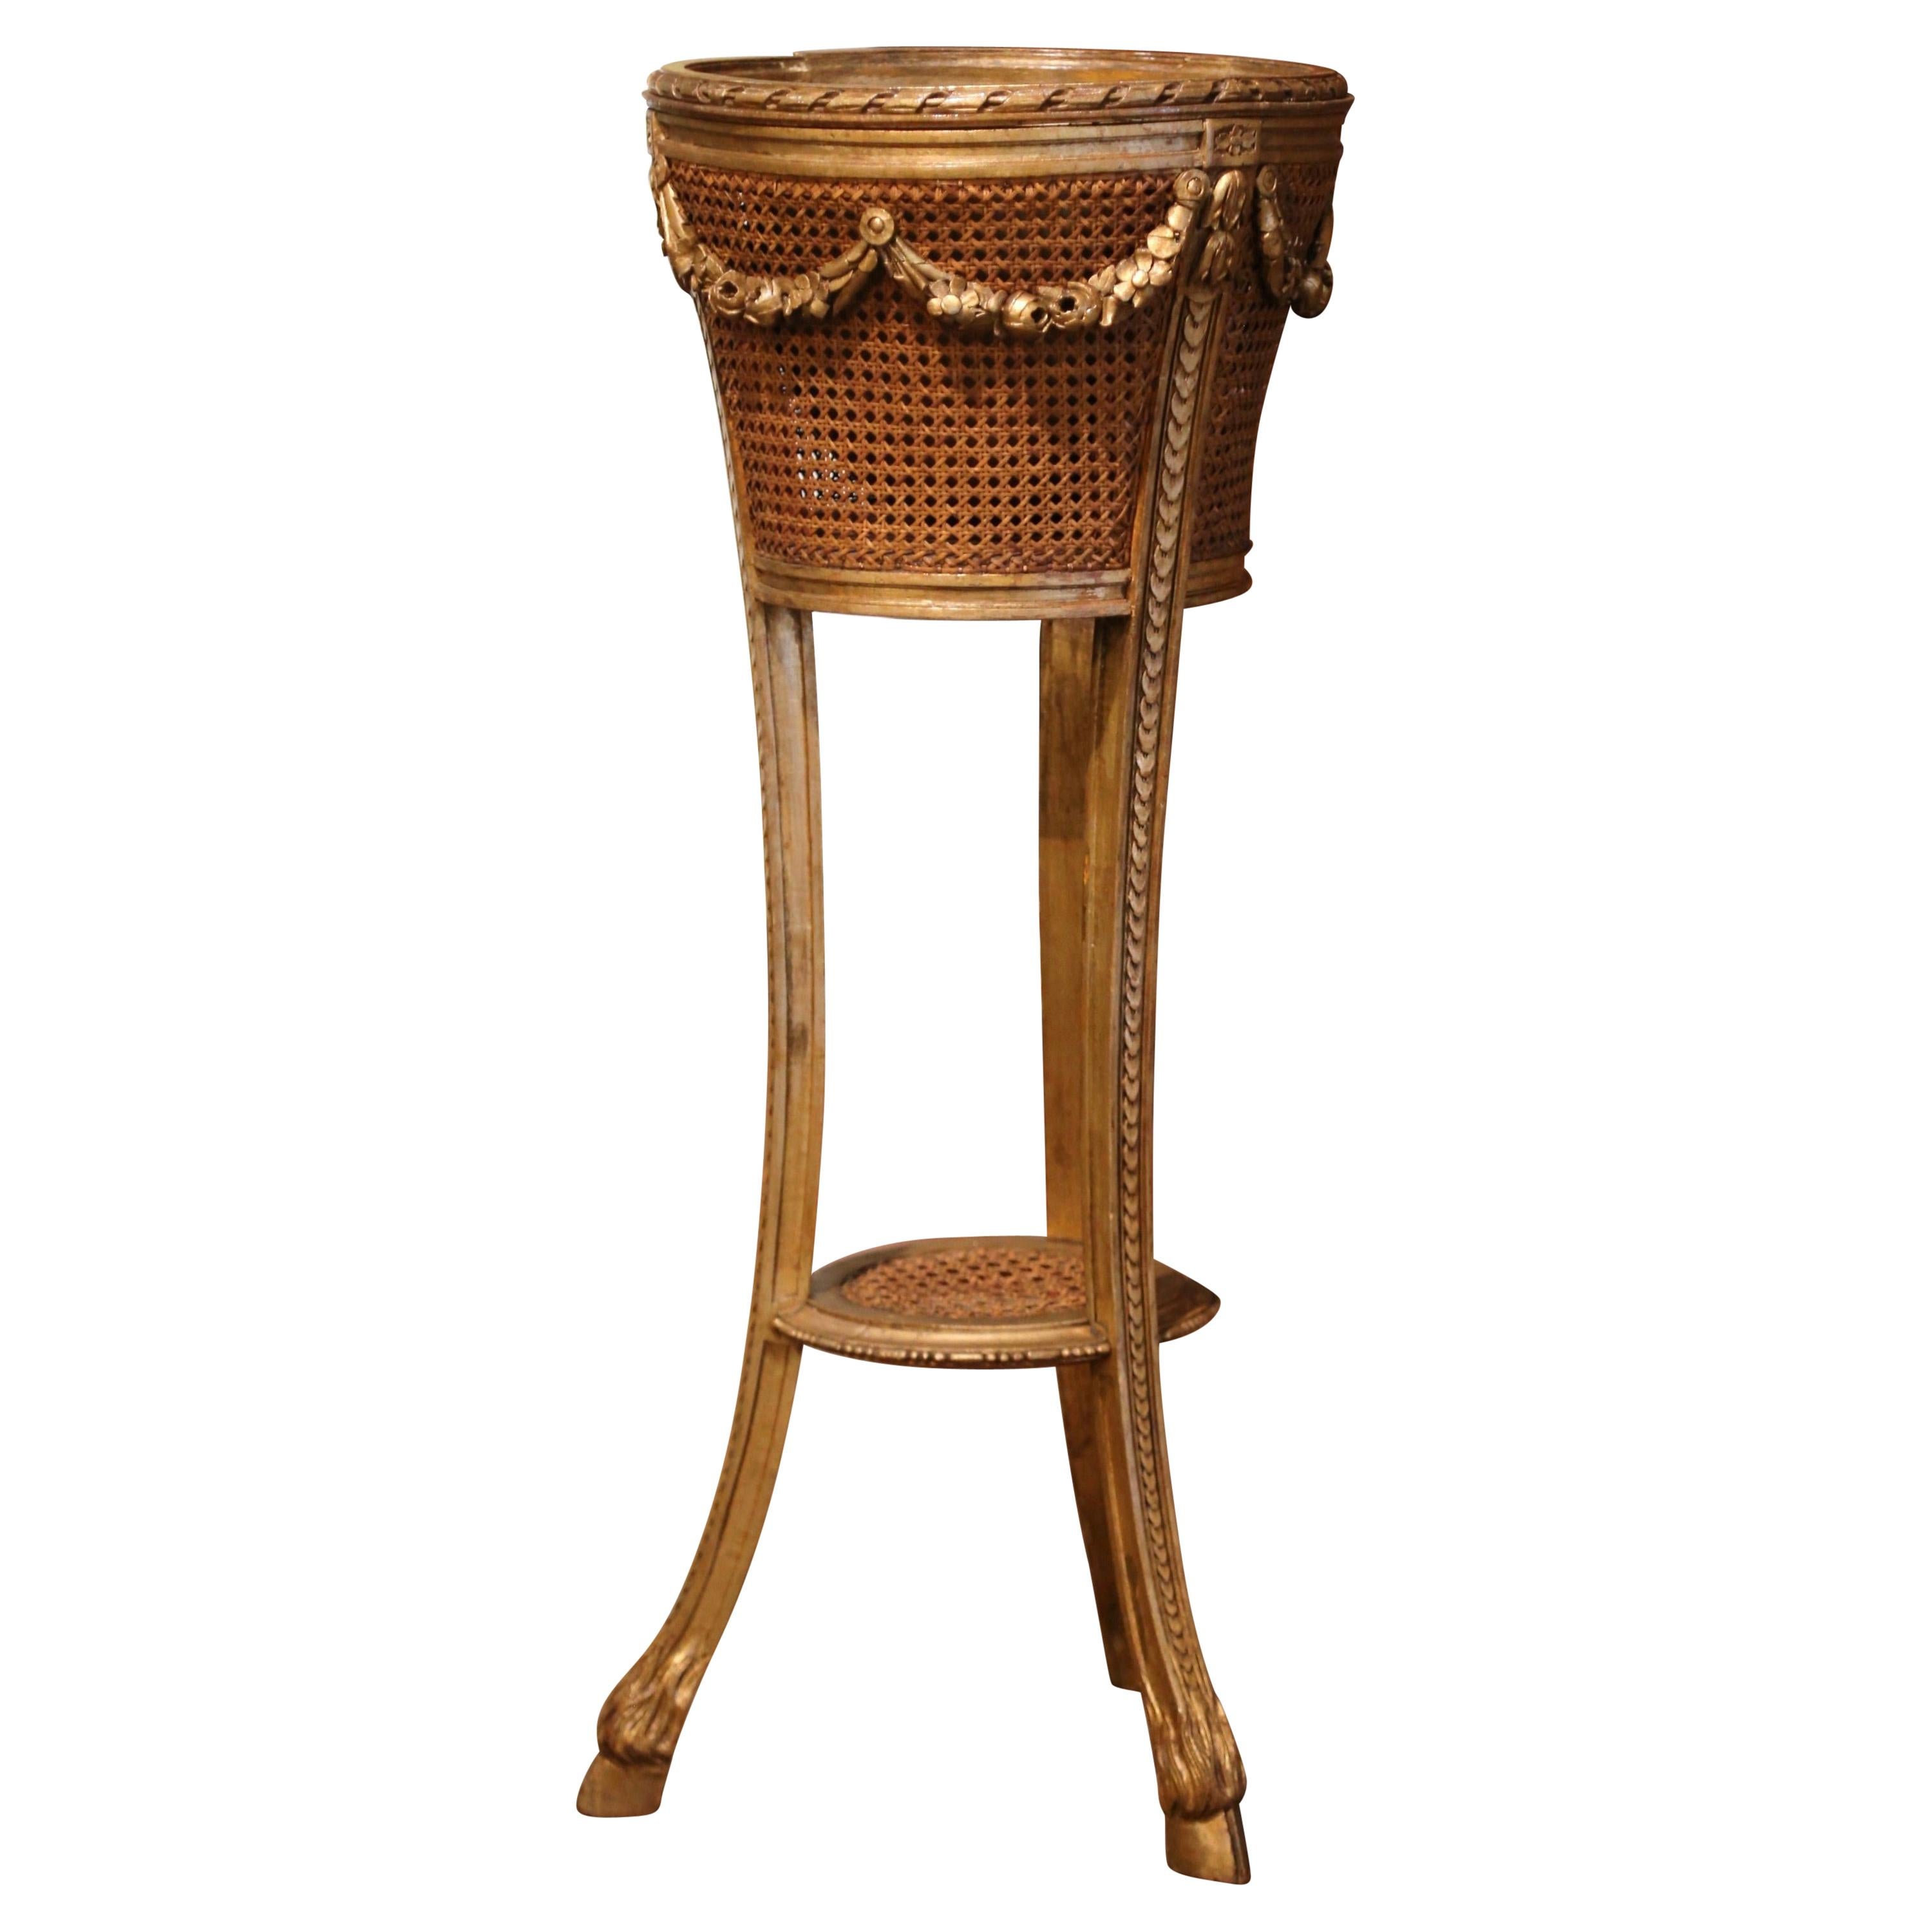 Mid-19th Century French Louis XVI Carved Gilt Wood and Cane Plant Stand